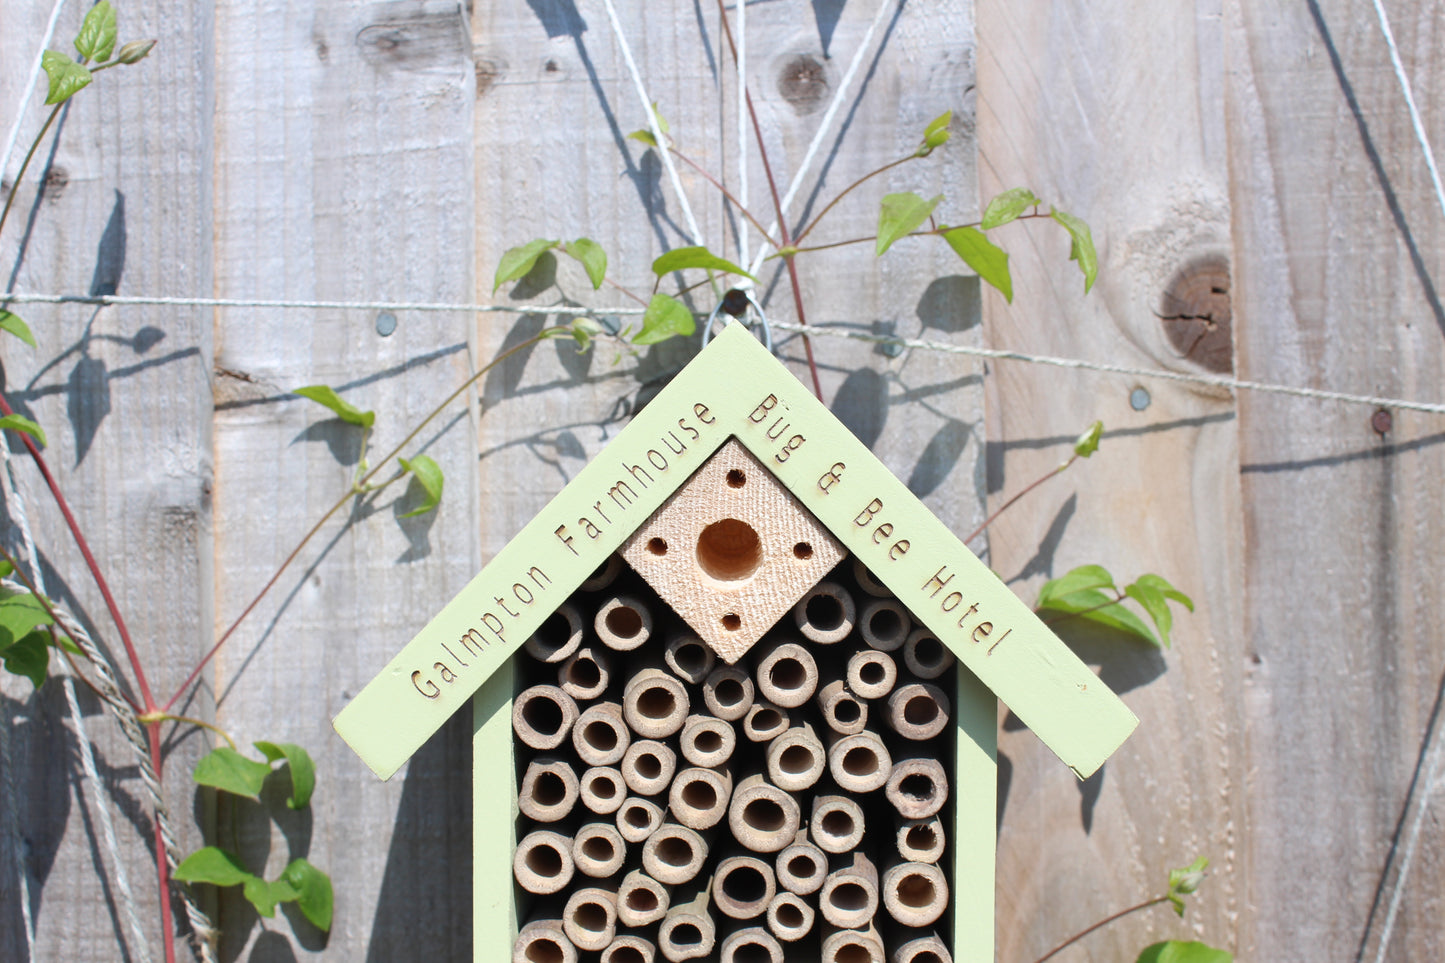 Personalised Bug and Bee Insect Home that says "Galmptoon Farmhouse" "Bug & Bee Hotel"